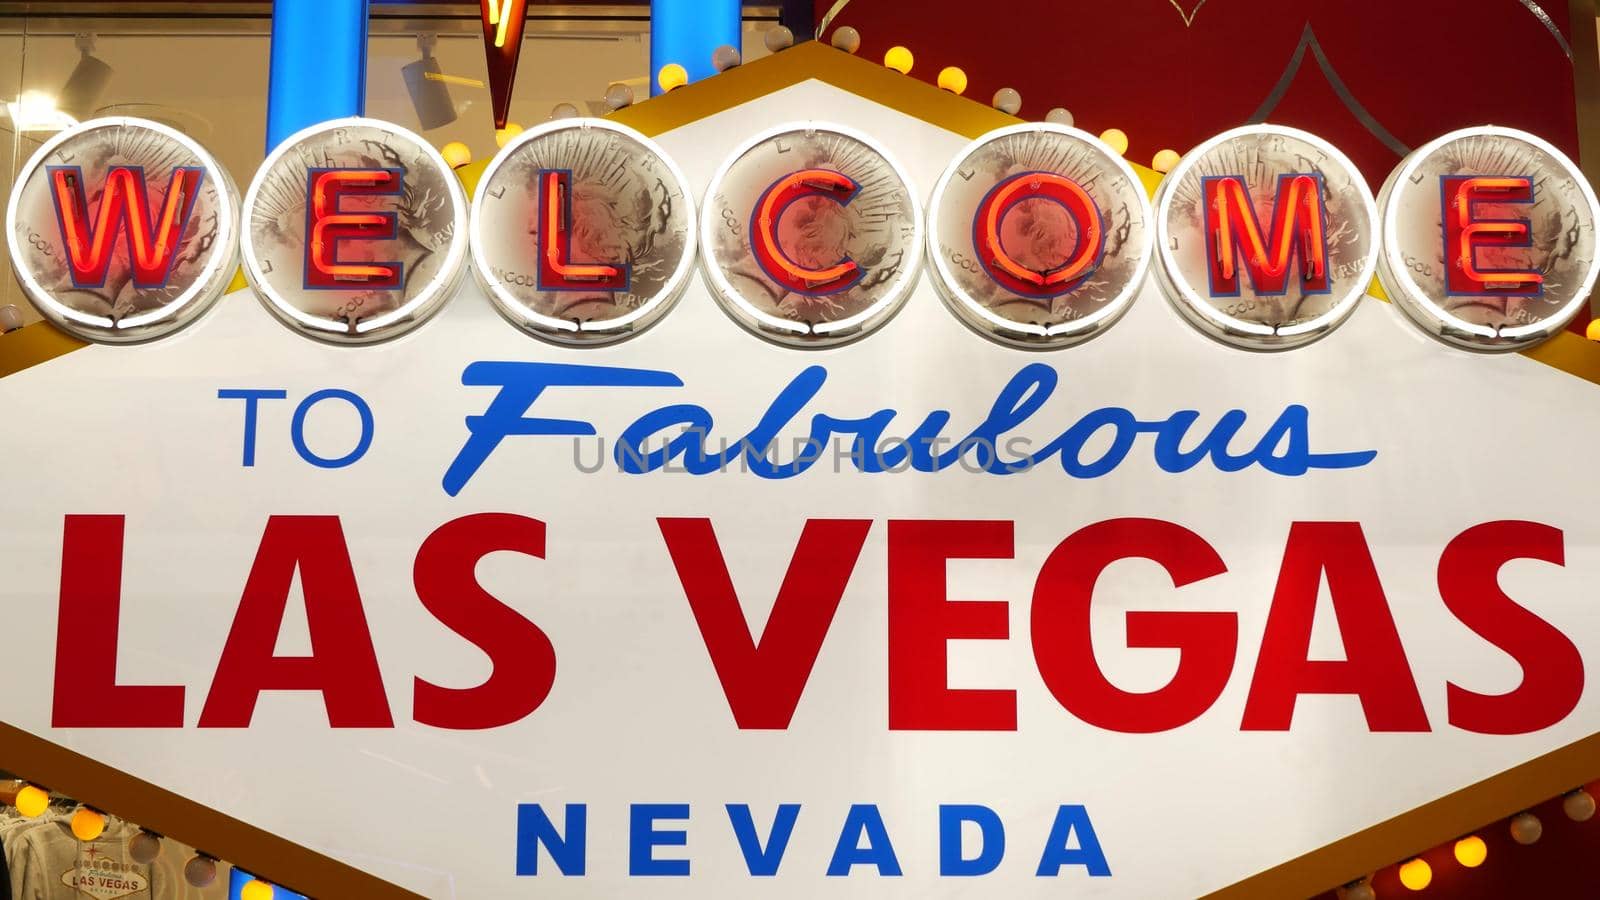 Welcome to fabulous Las Vegas retro neon sign in gambling tourist resort, USA. Iconic vintage glowing banner, symbol of casino, games of chance, money playing and hazard bets. Illuminated signboard.